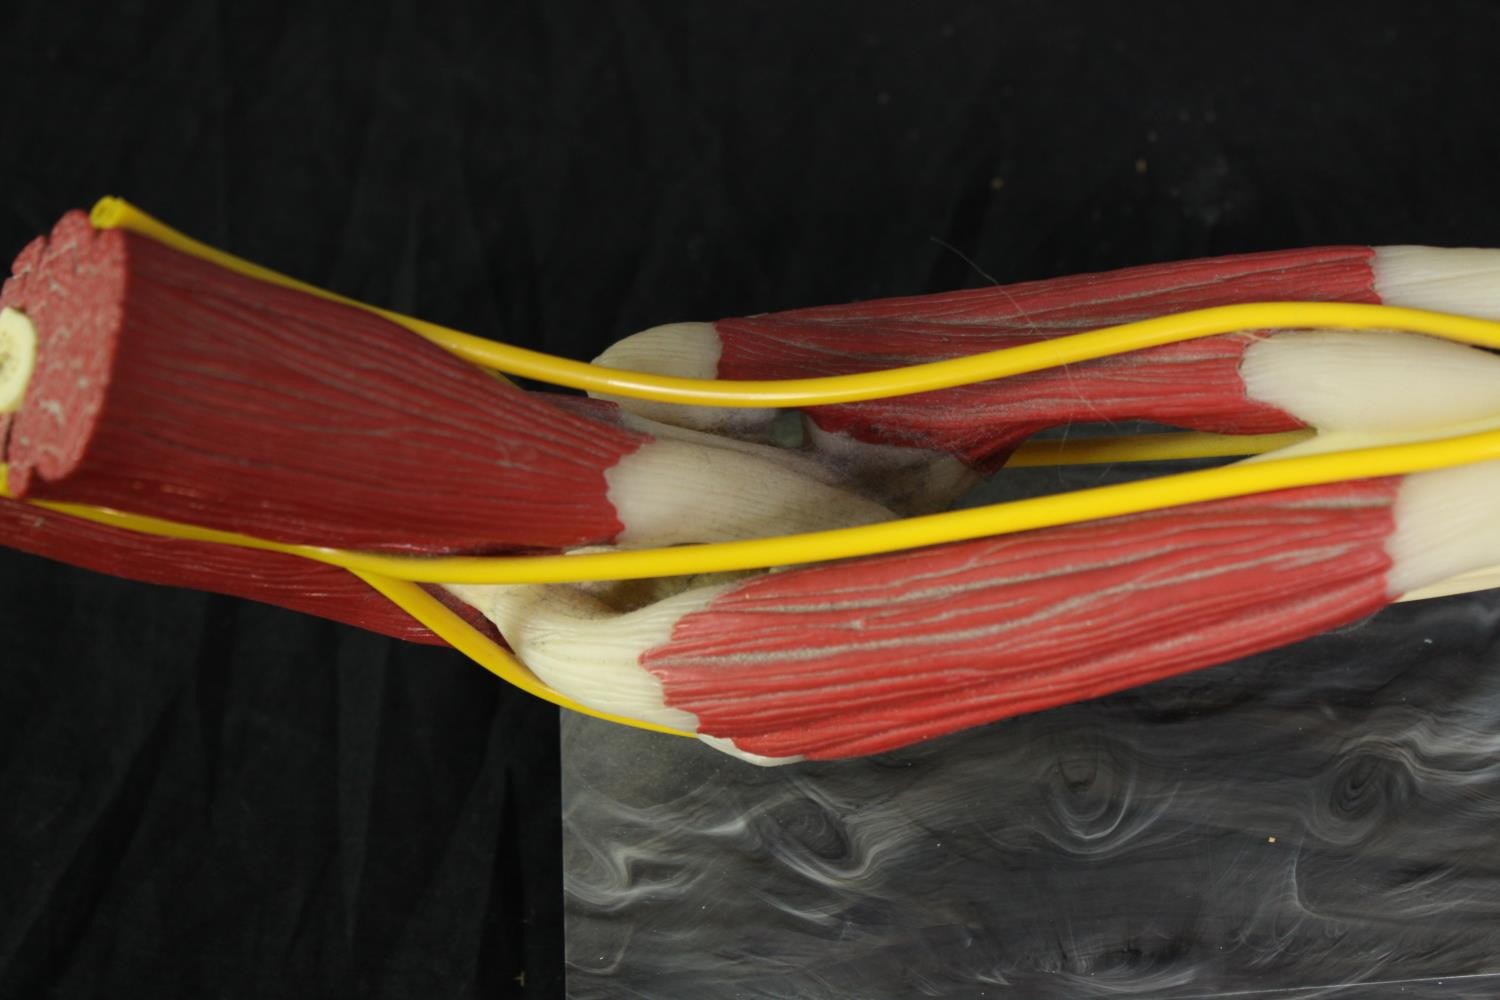 A medical anatomical model showing the musculature system of the human arm. Set on a plinth. L.50 - Image 4 of 4